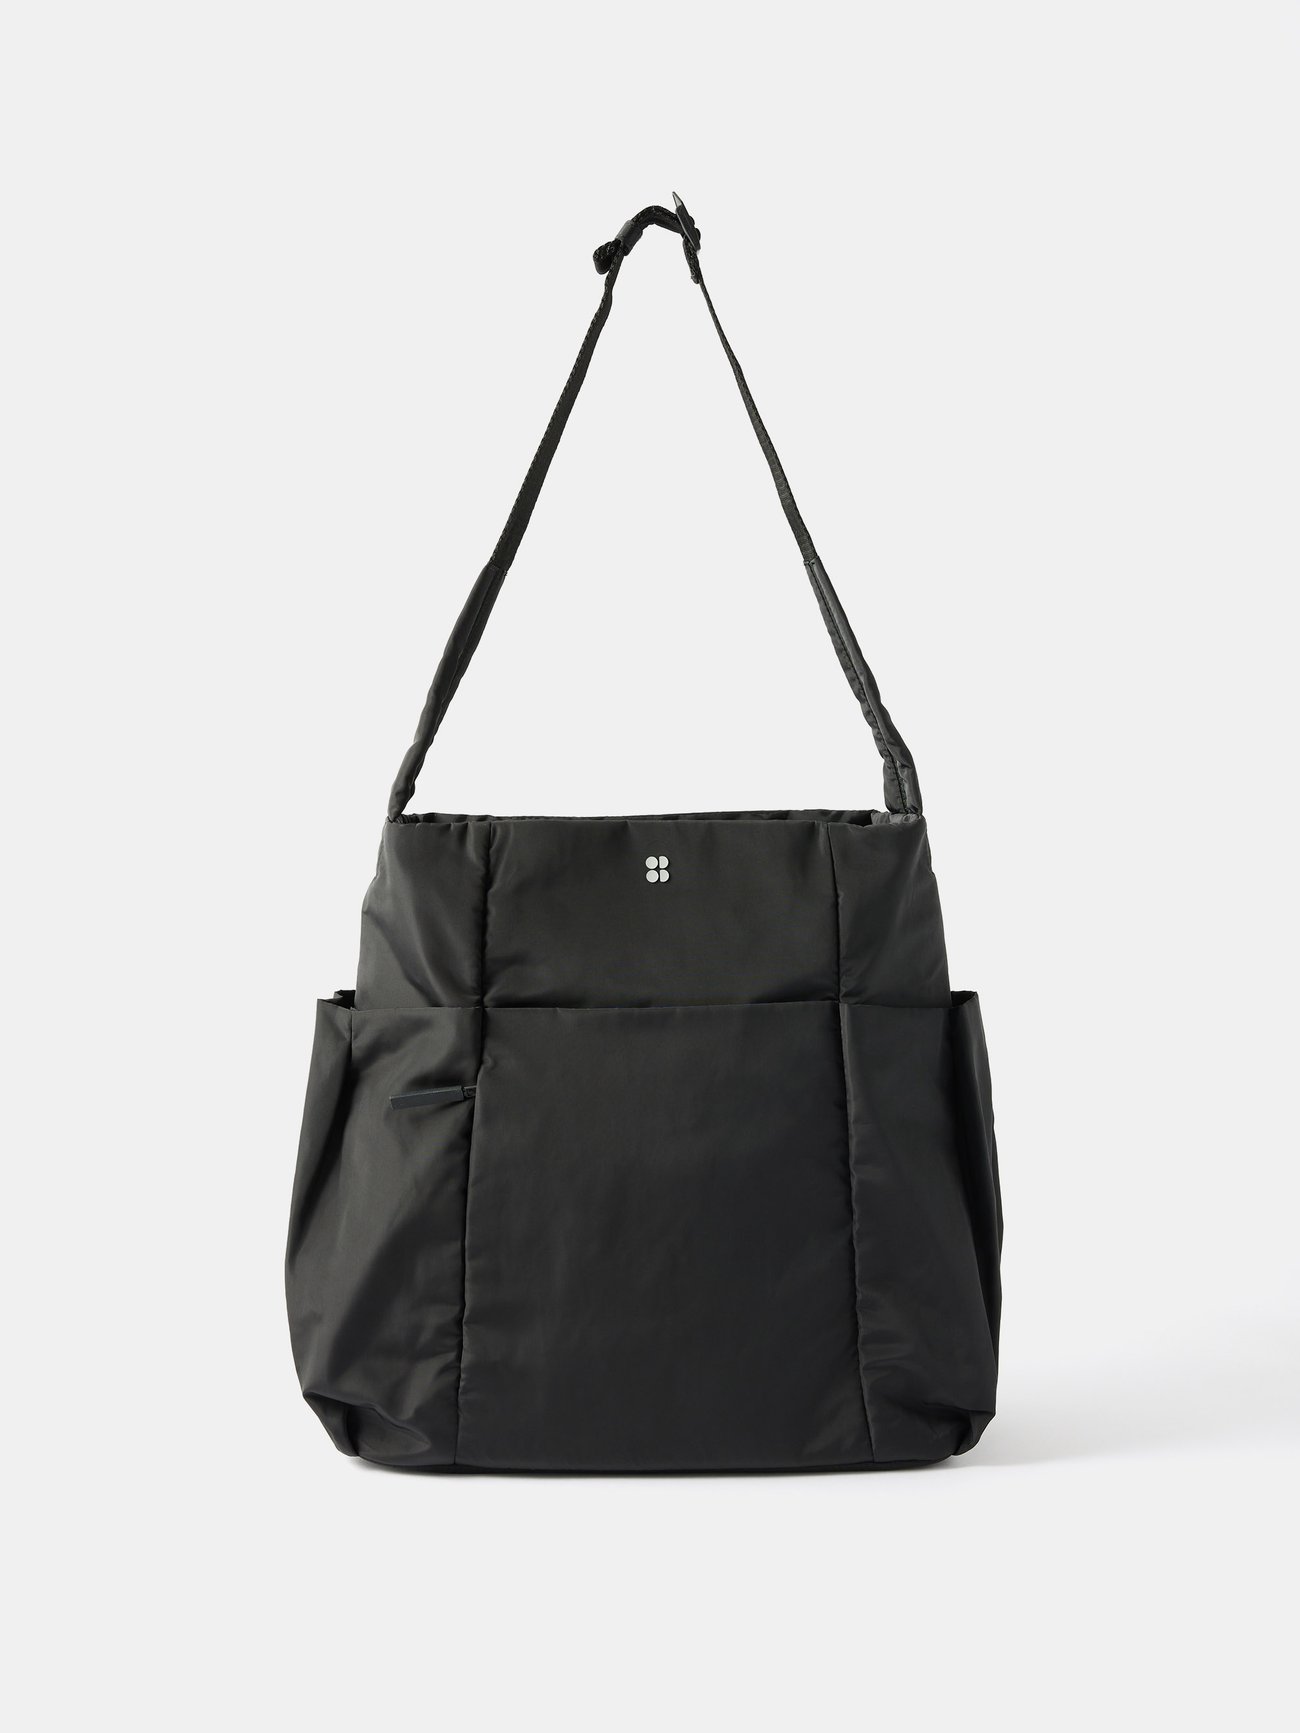 Sweaty Betty Adjustable Strap Tote Bags for Women